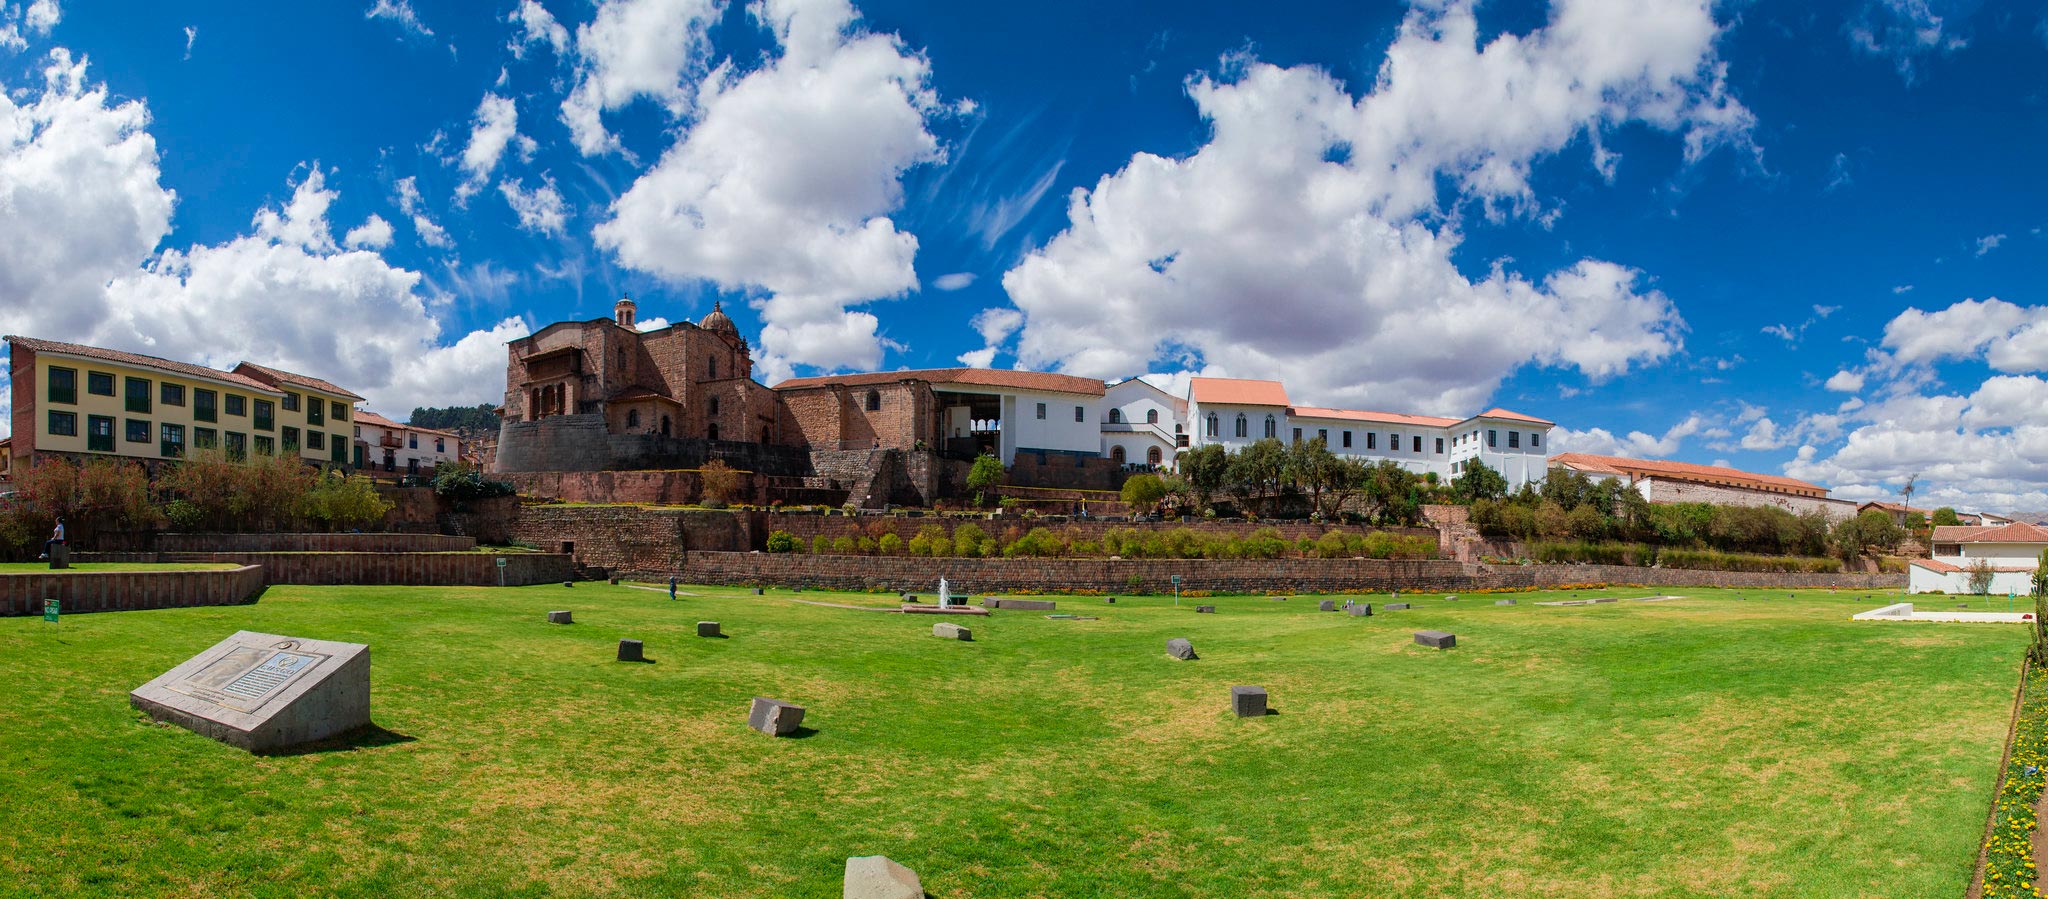 Qoricancha - What to do in 3 days in Cusco